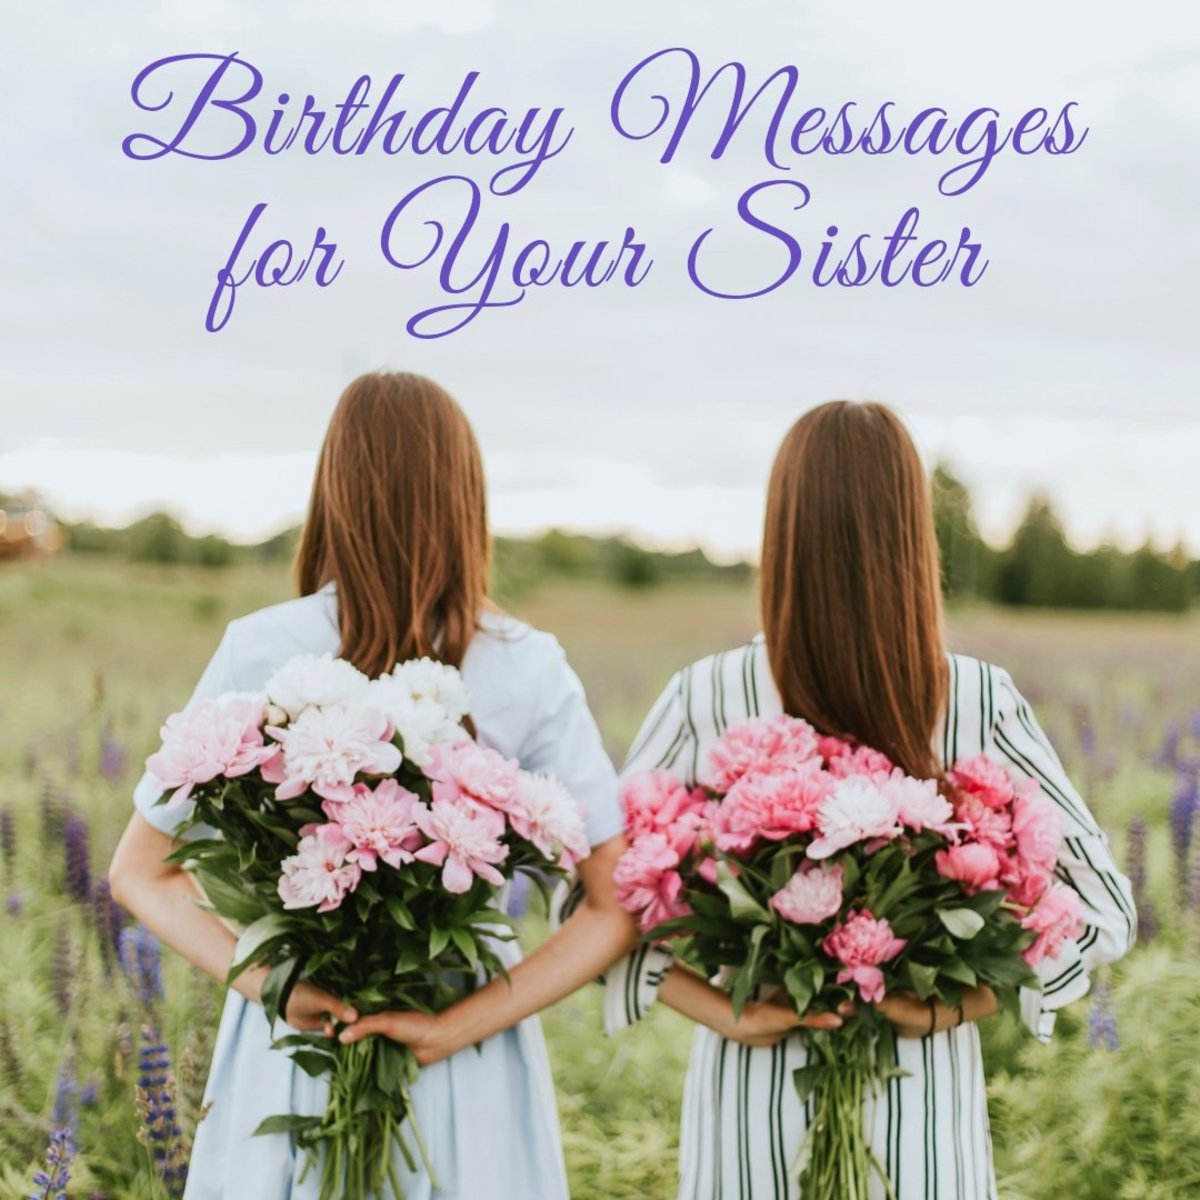 Love your sister to bits? Have happy childhood memories of spending time with your sister? Then wish her a happy birthday with one of these cute poems or messages!